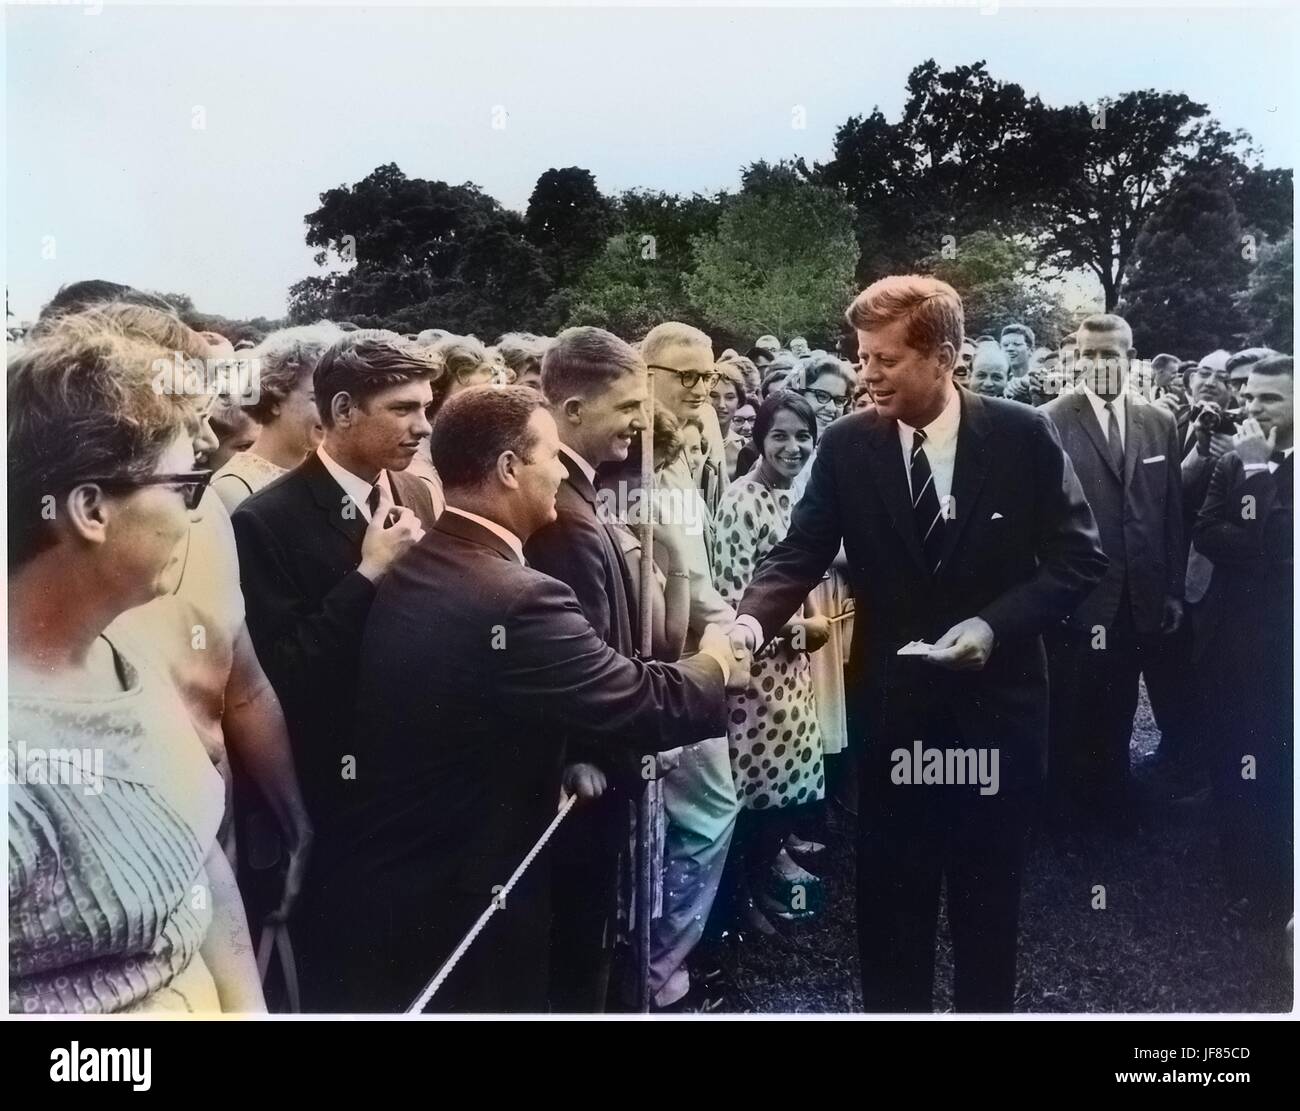 President John F. Kennedy greets volunteers with the Peace Corps on the south lawn at the White House, Washington, D.C, August 9, 1962. Image courtesy National Archives. Note: Image has been digitally colorized using a modern process. Colors may not be period-accurate. Stock Photo